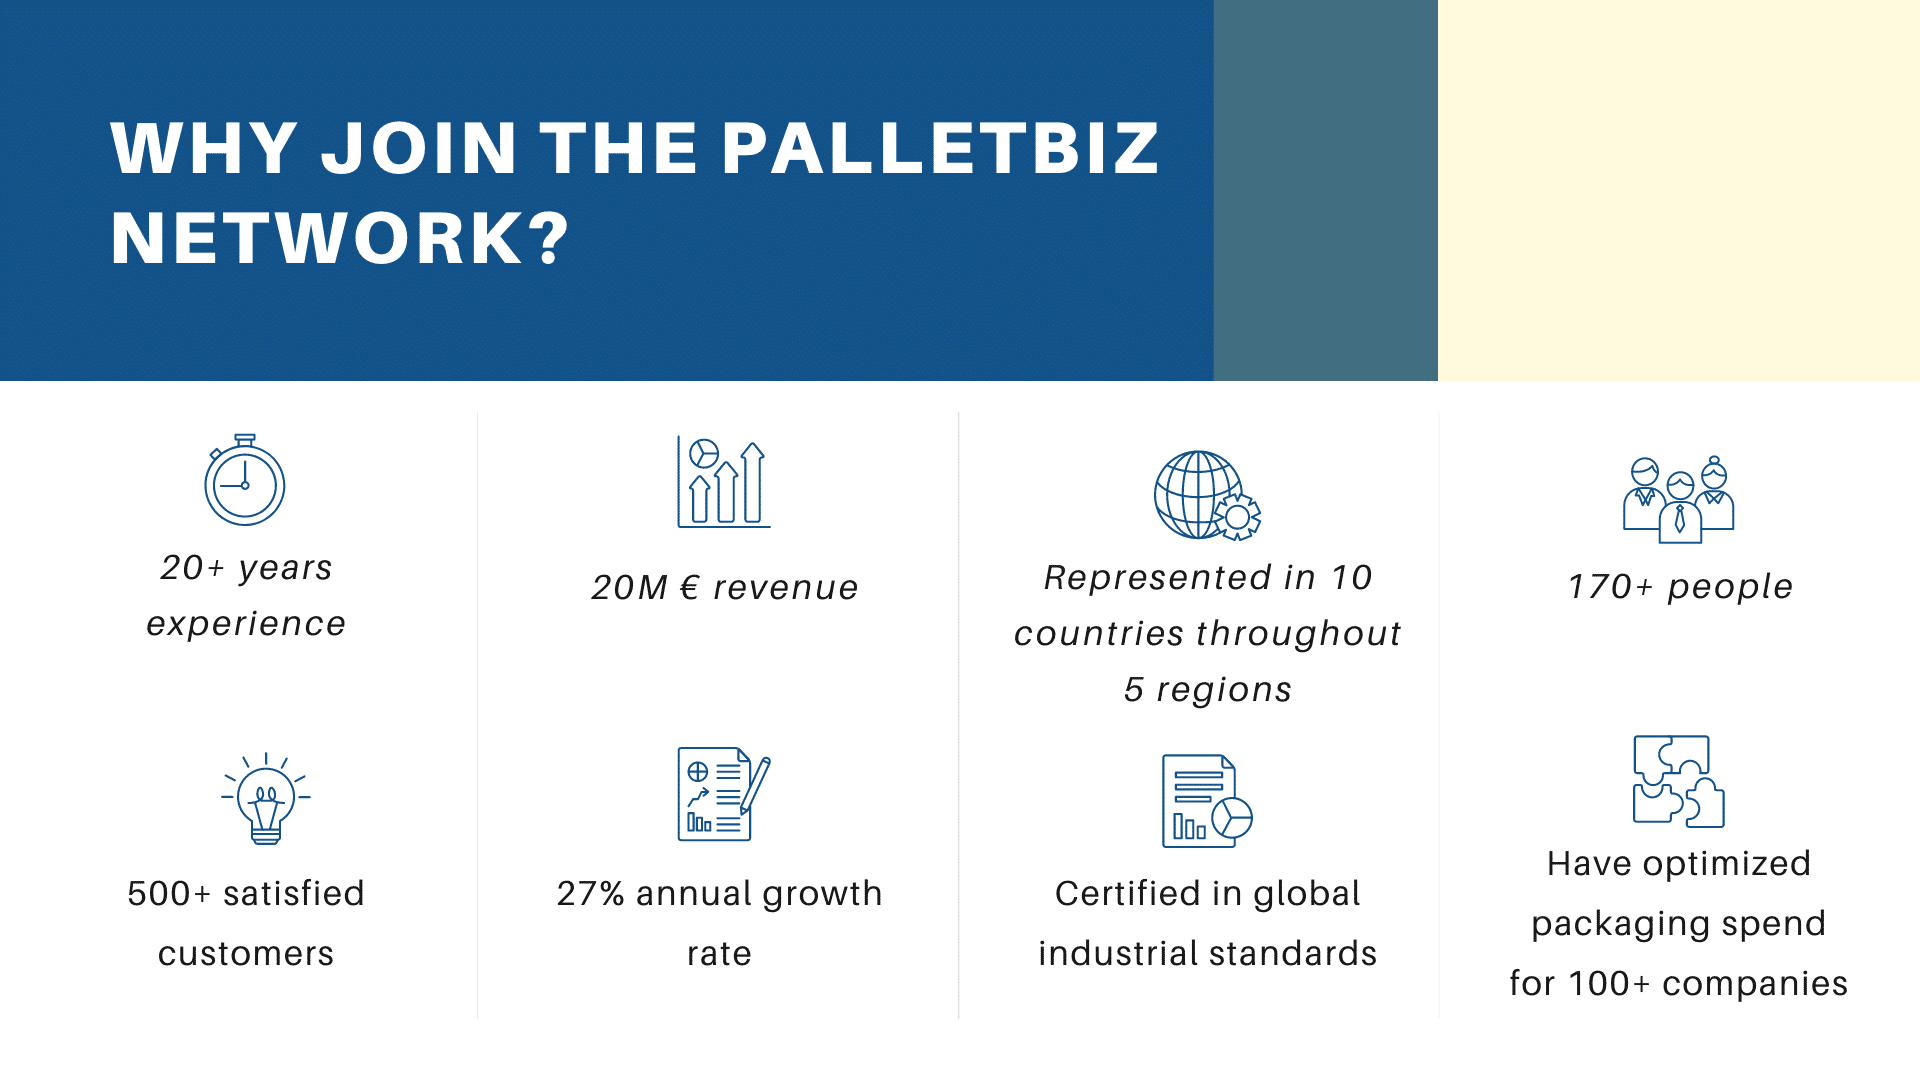 Why join the PalletBiz network?